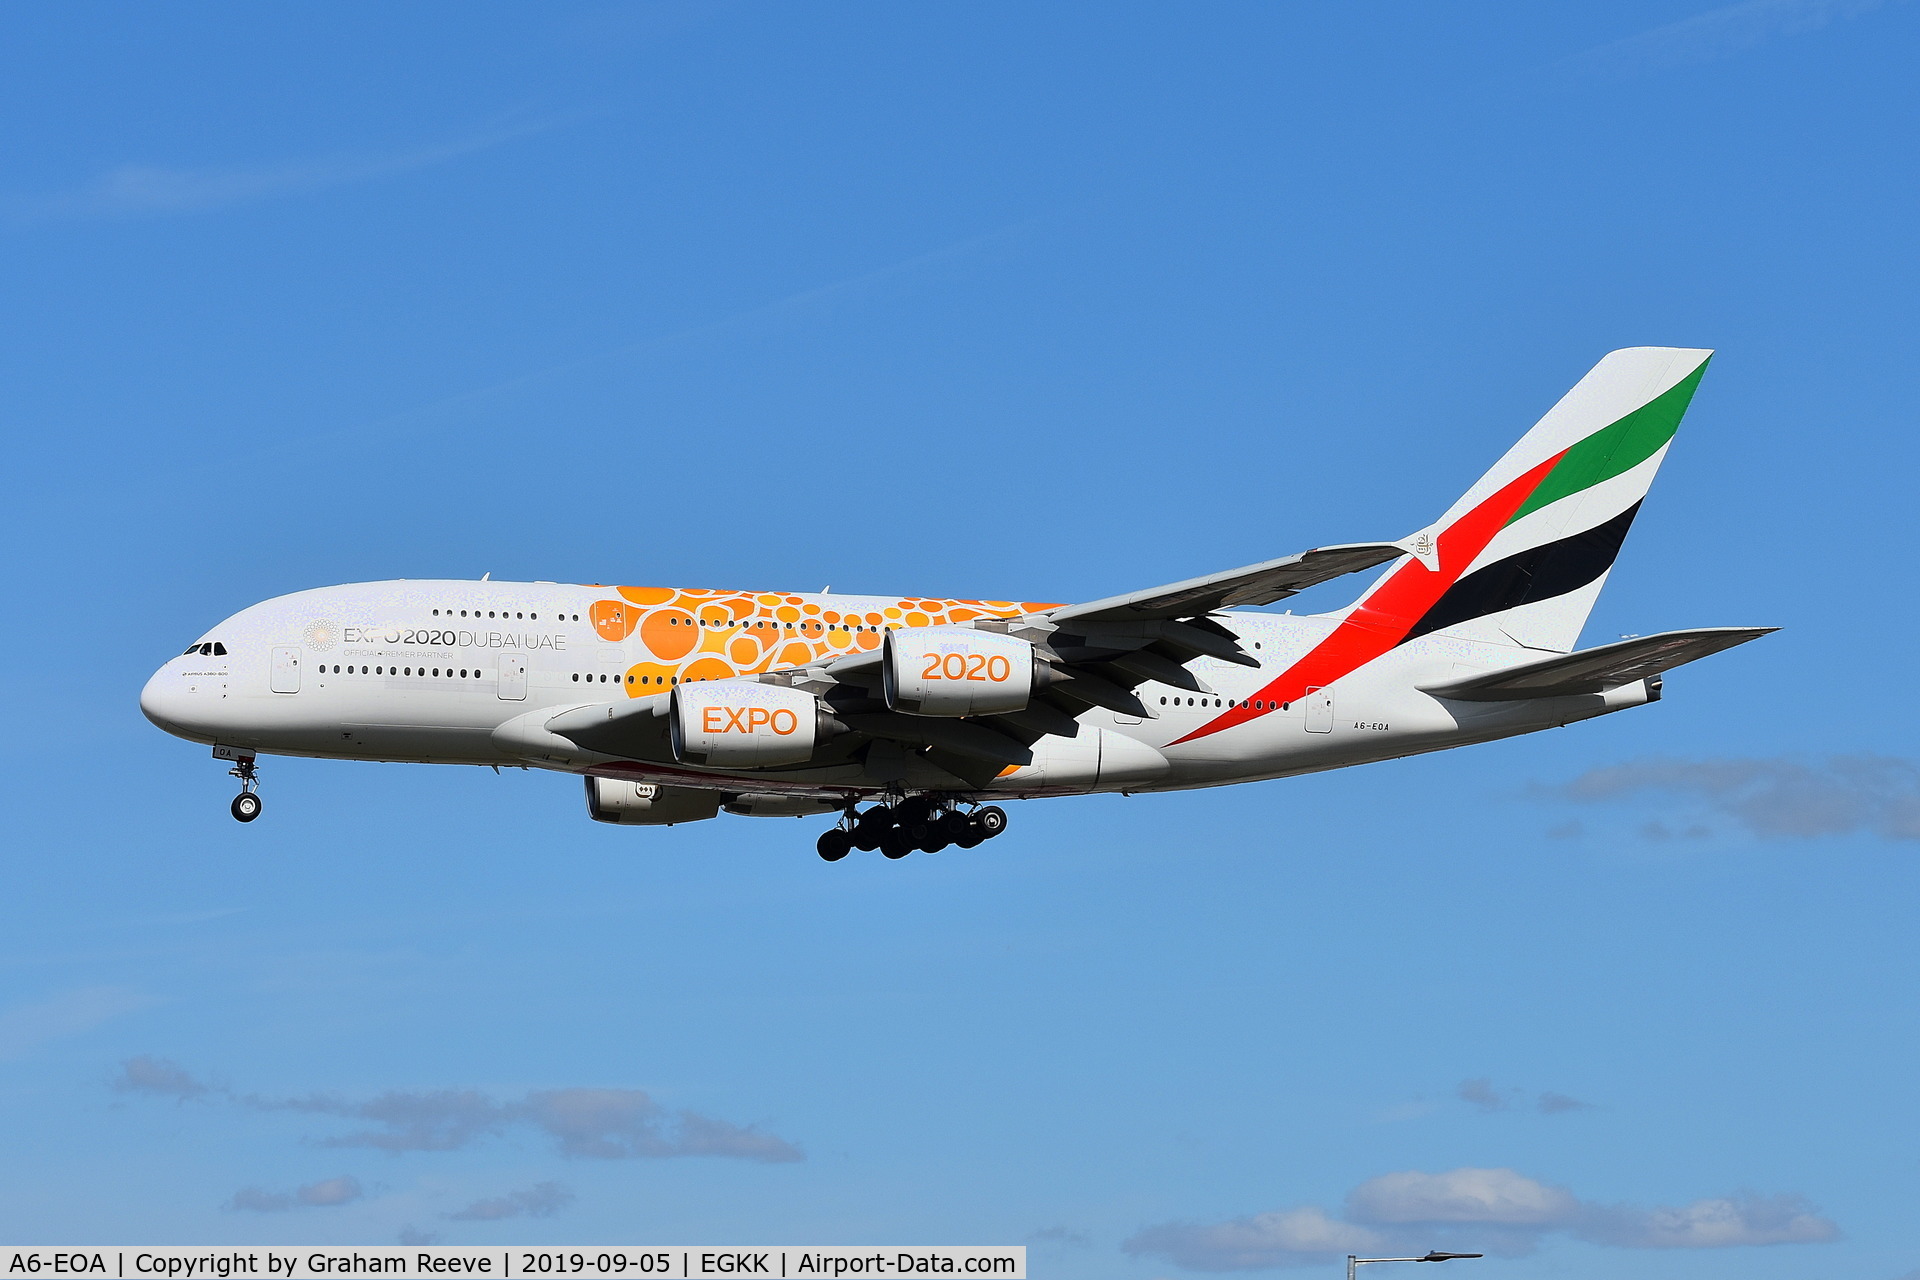 A6-EOA, 2014 Airbus A380-861 C/N 159, Landing at Gatwick.